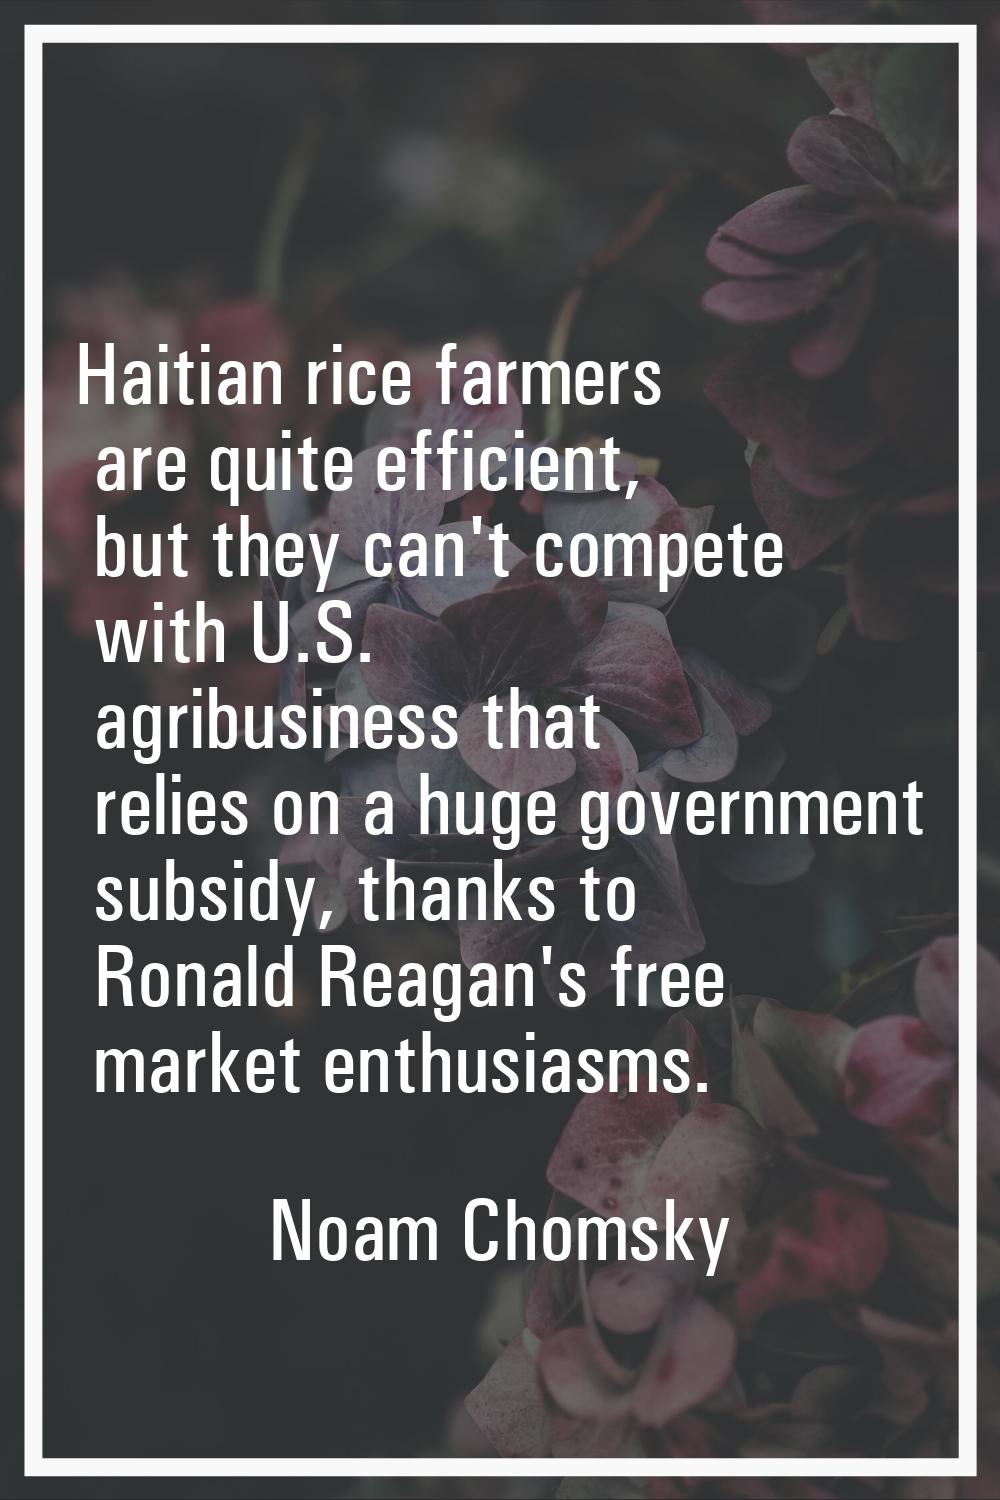 Haitian rice farmers are quite efficient, but they can't compete with U.S. agribusiness that relies